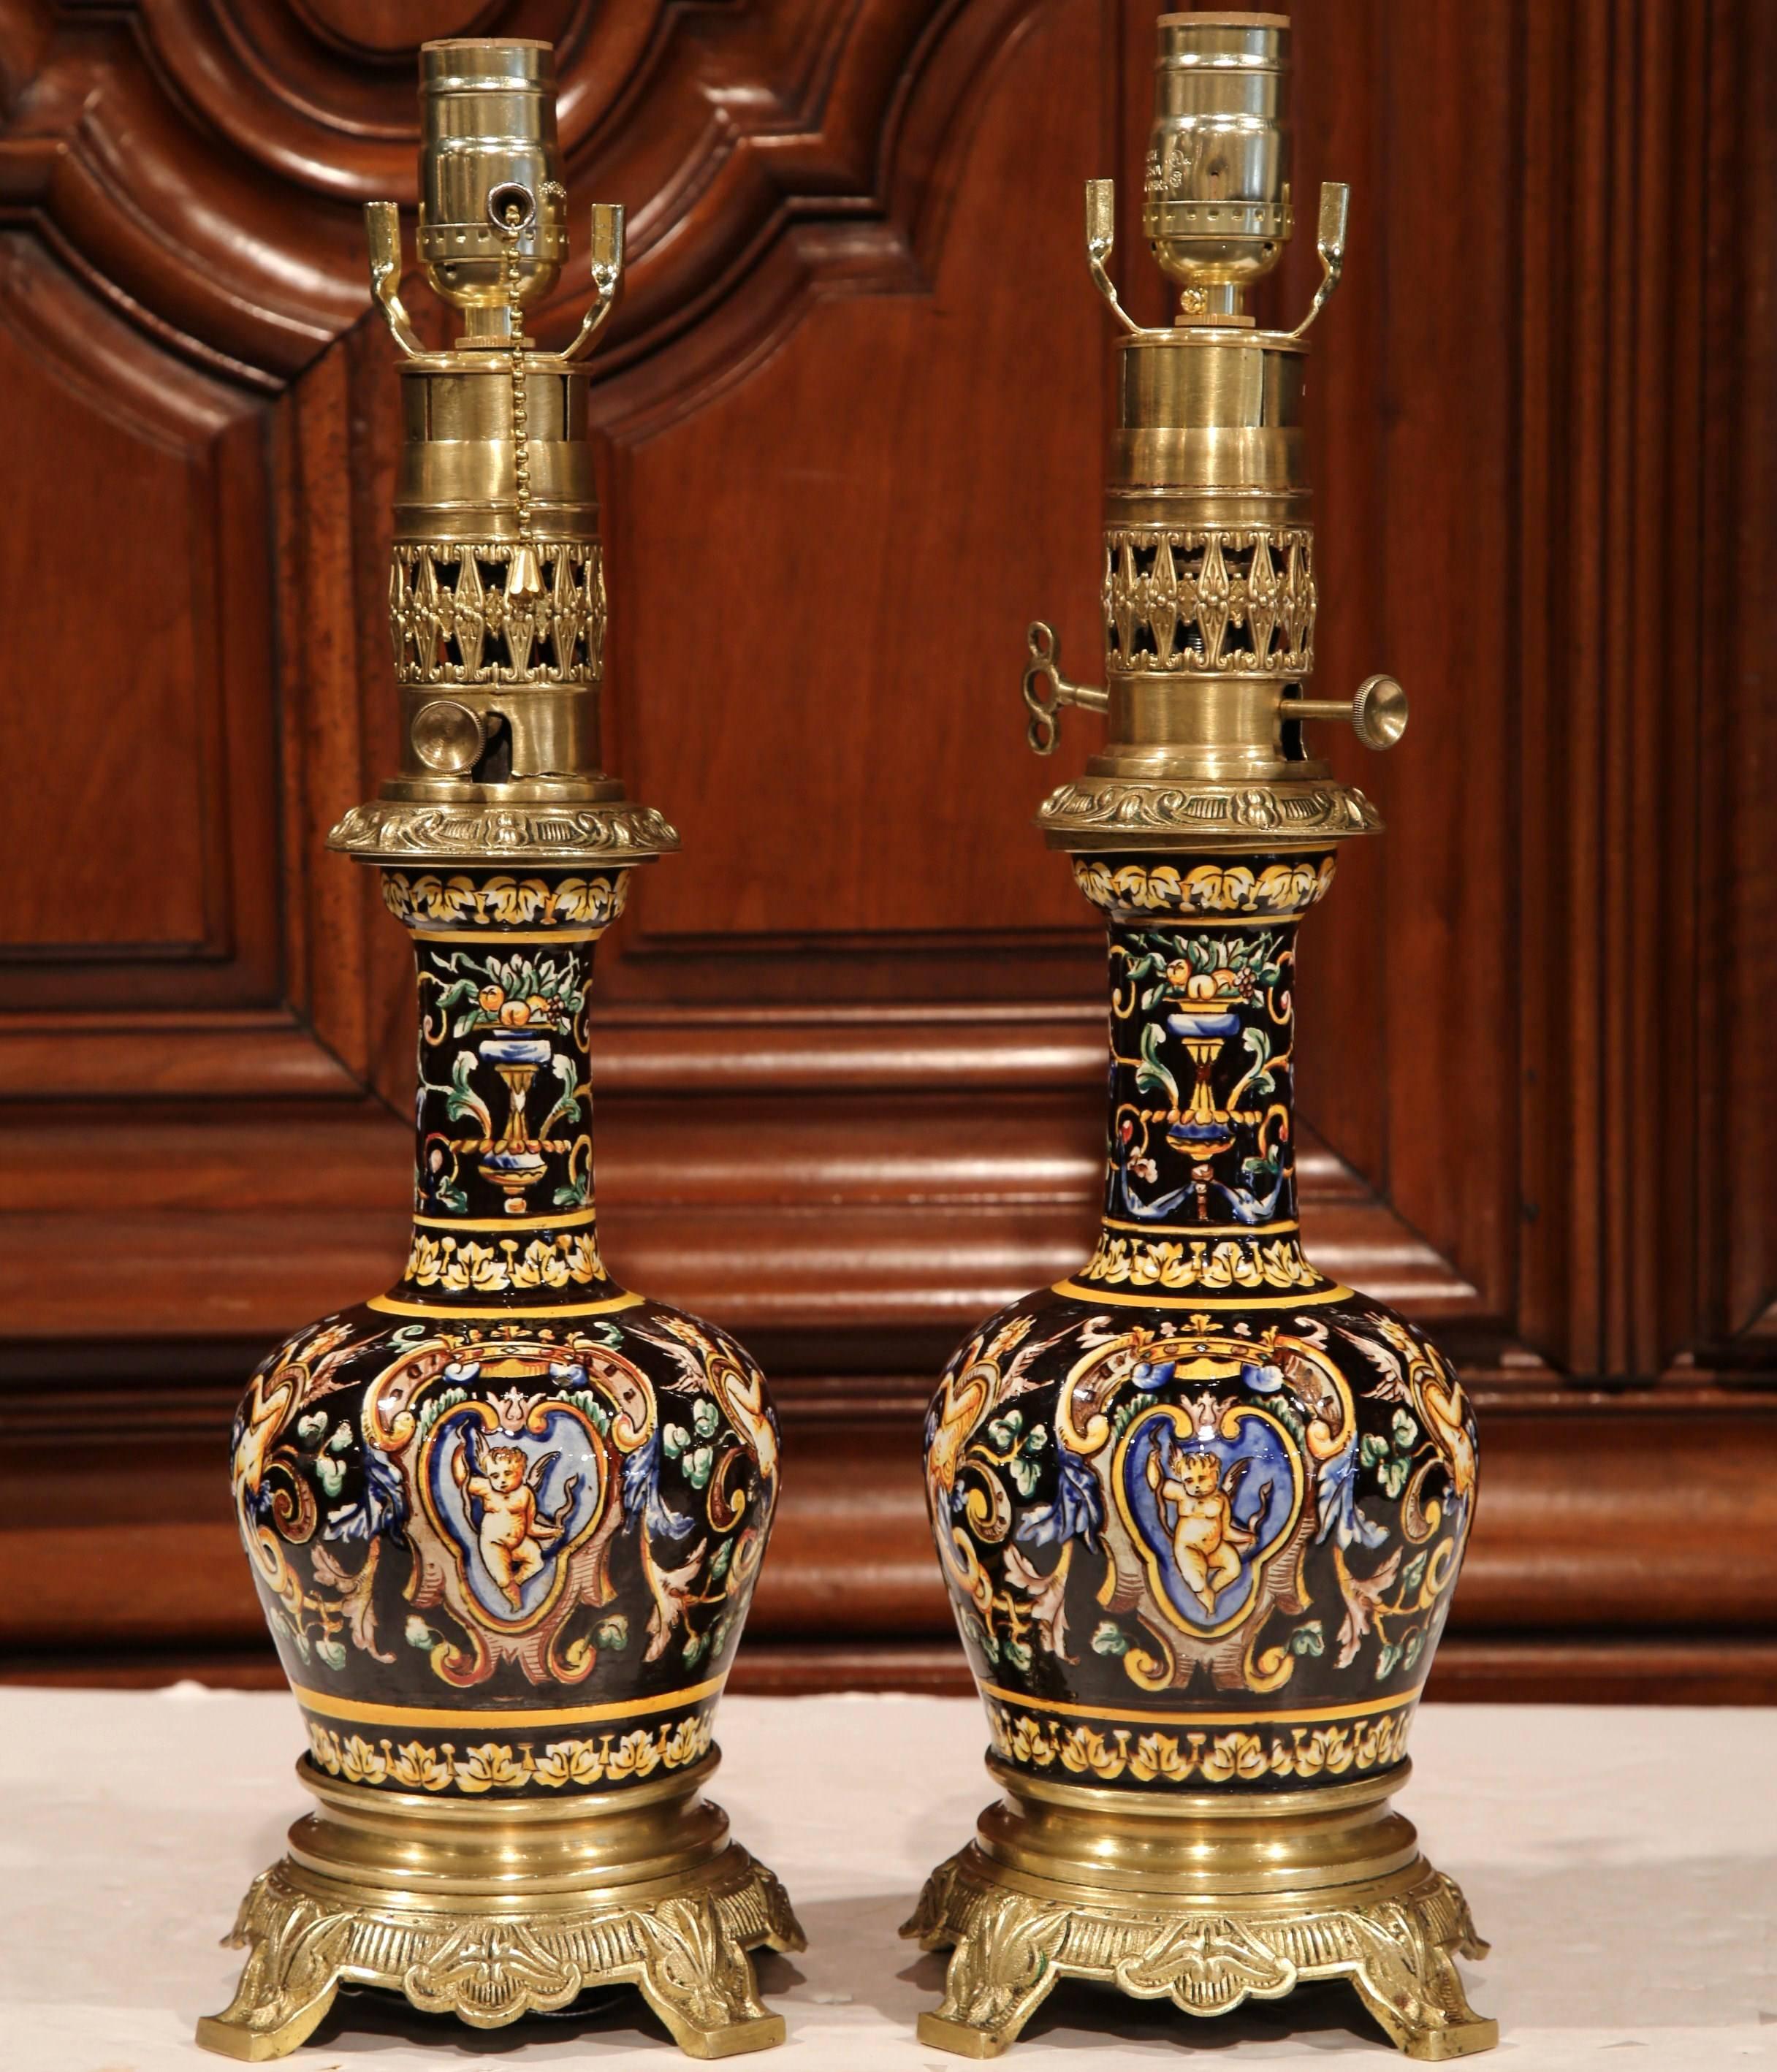 For extra light next to your bedside, try this exquisite pair of antique 